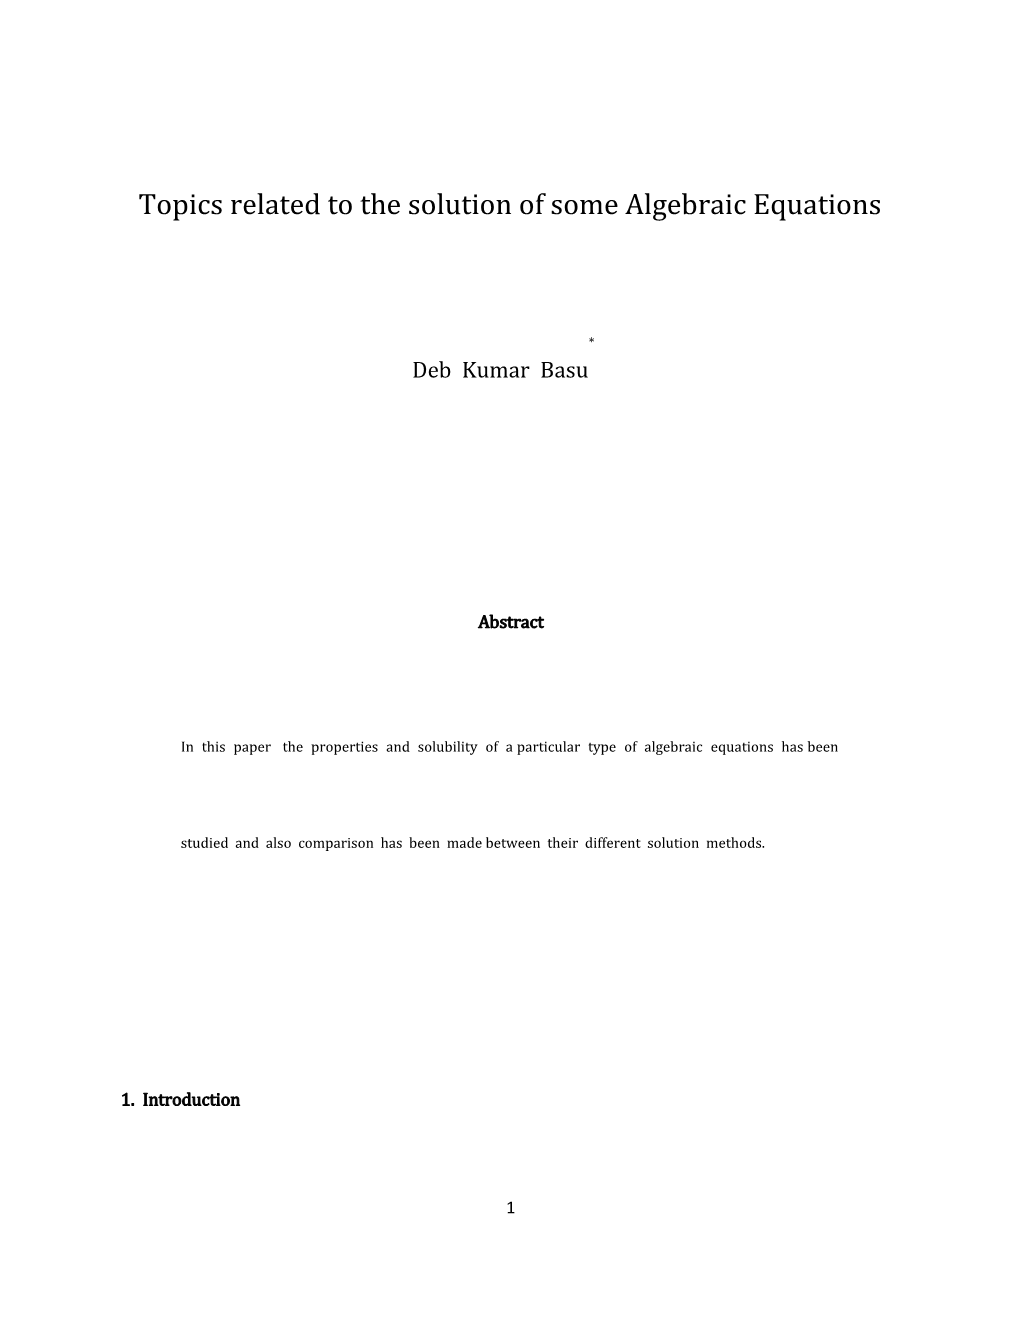 ORMAT Topics Related to the Solution of Some Algebraic Equations